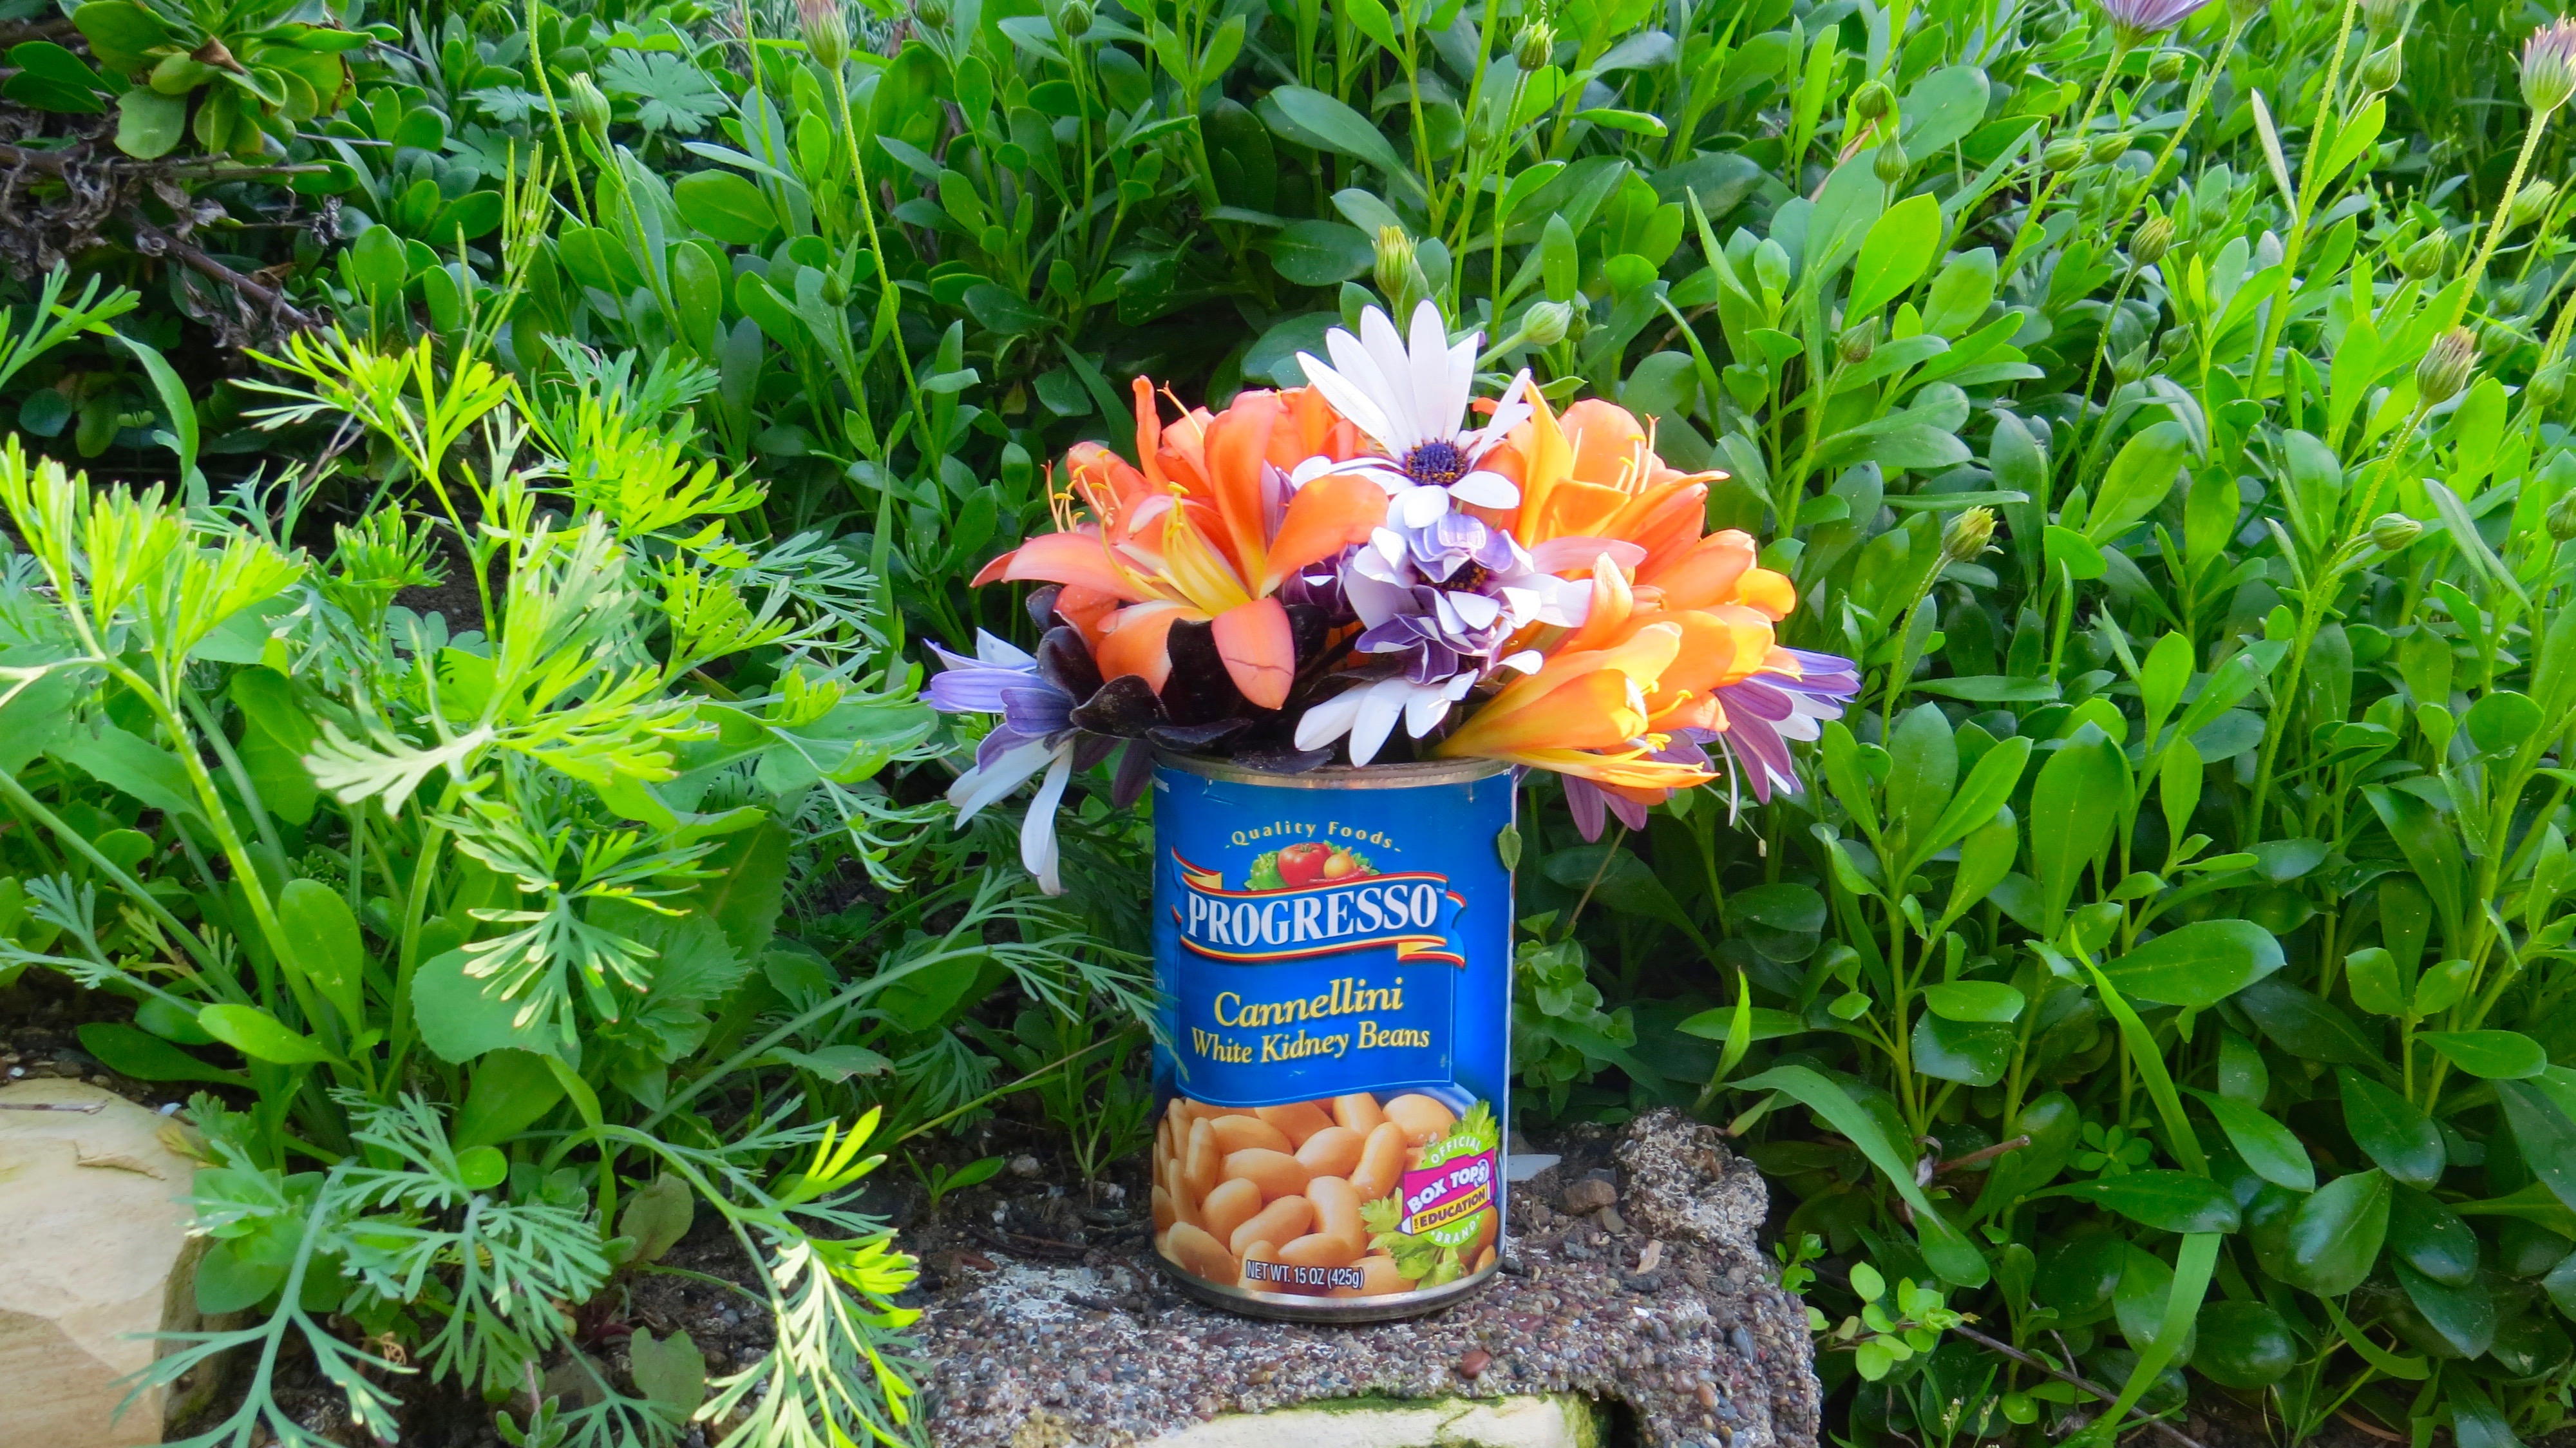 My yard is a flower shop but no container in sight around here.  So I retrieved my cannellini can from the bin and made my own vessel for my bouquet. 